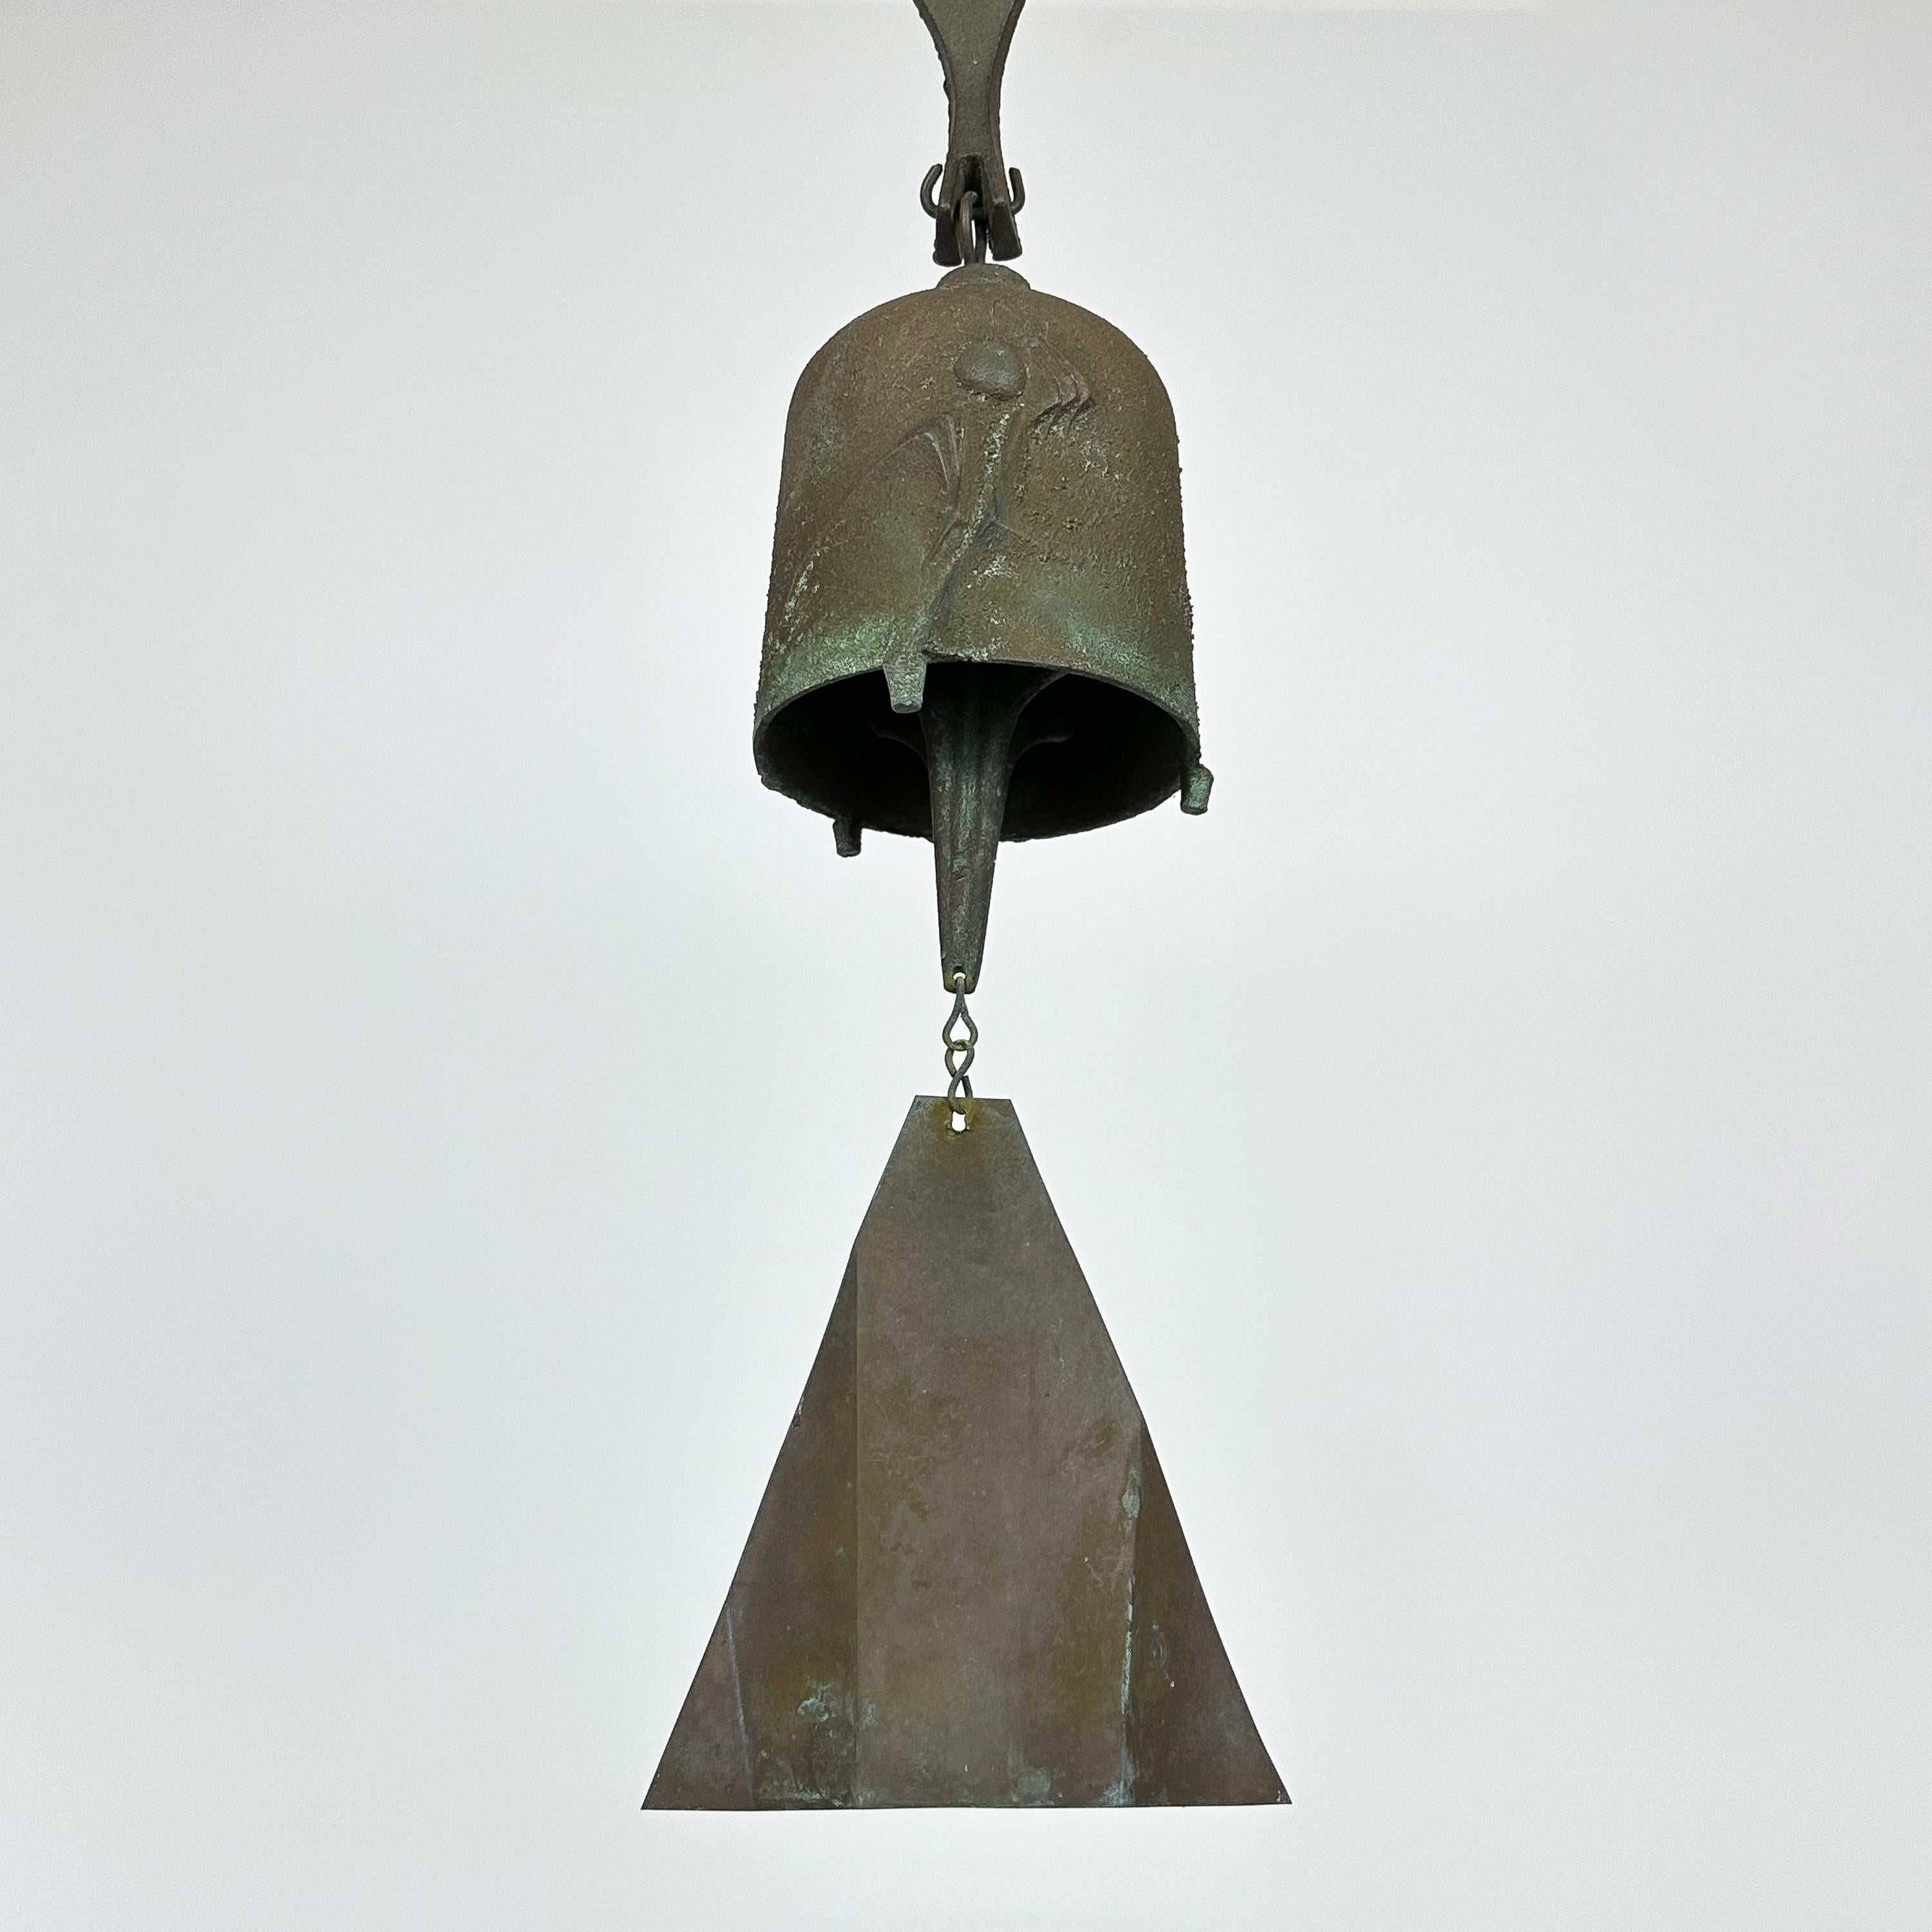 paolo soleri bells for sale